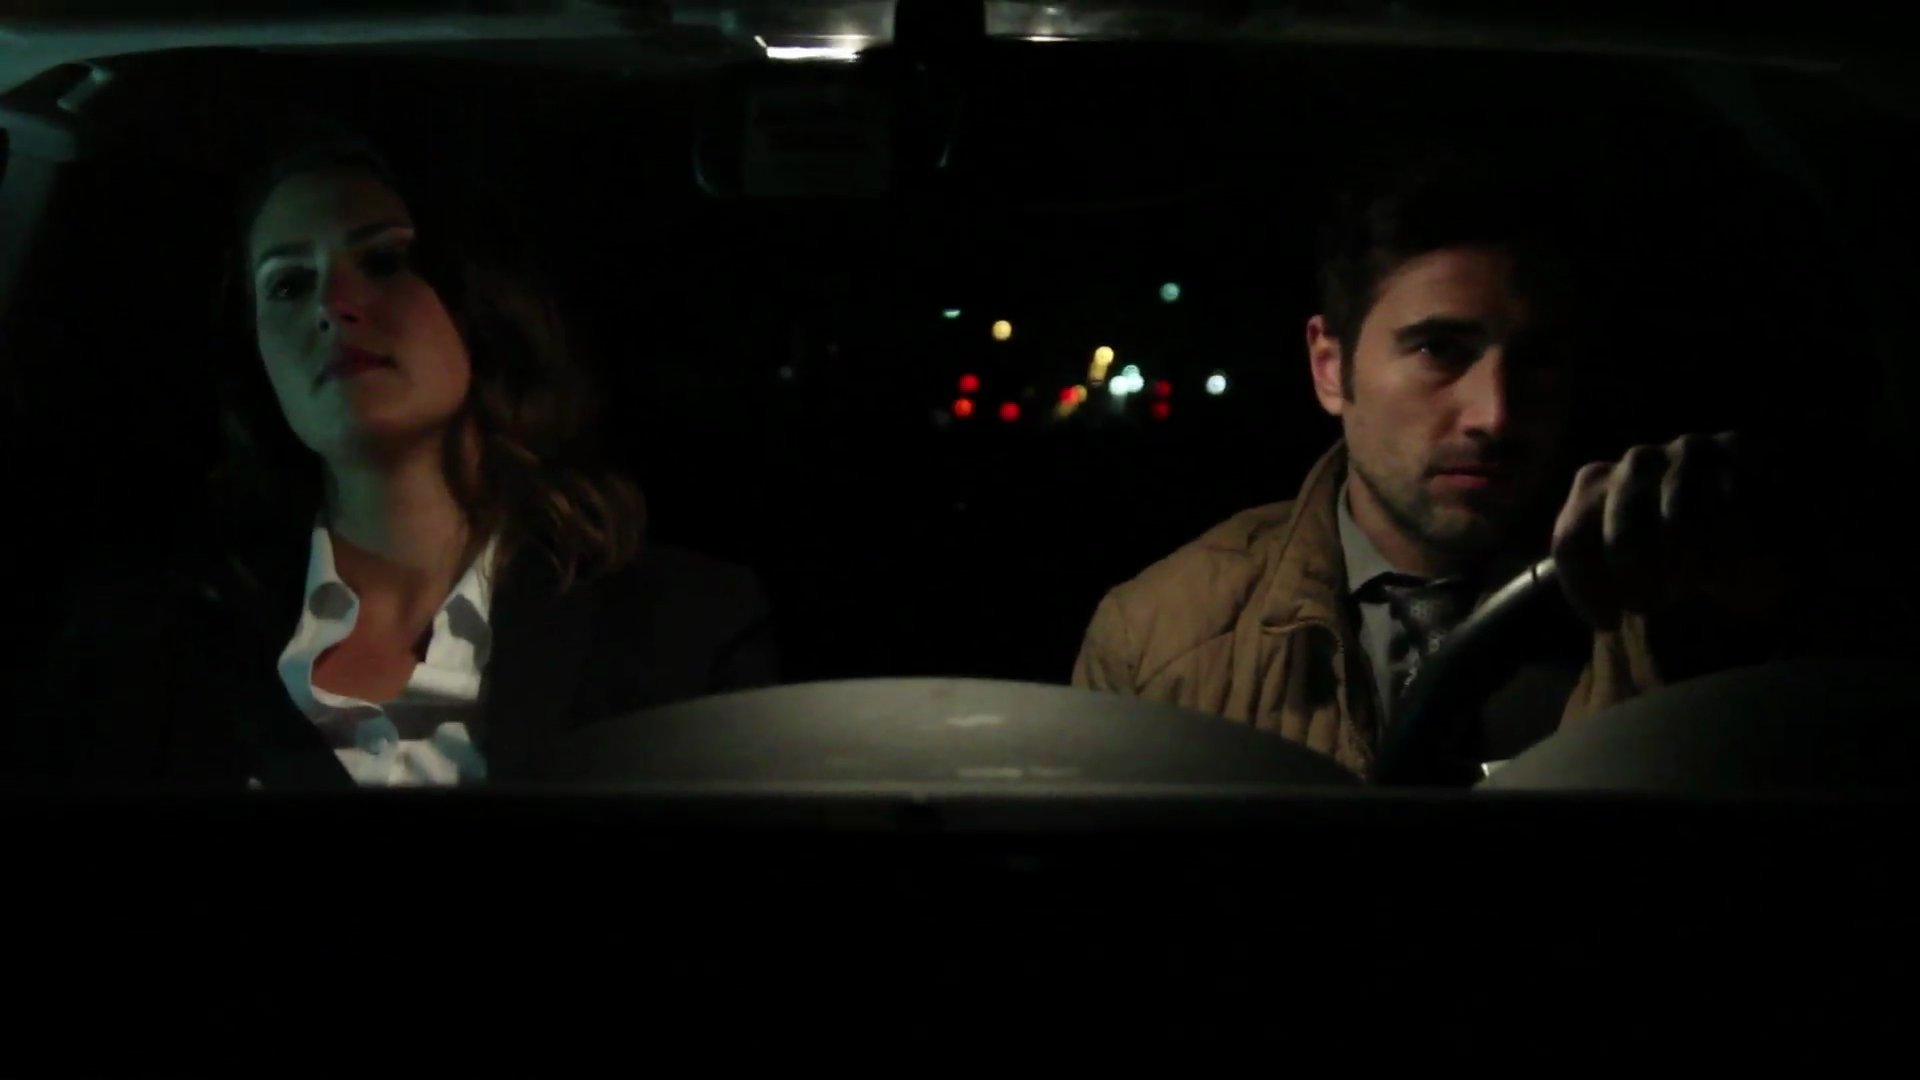 Rachael Meyers in Midnight Showing (2012)